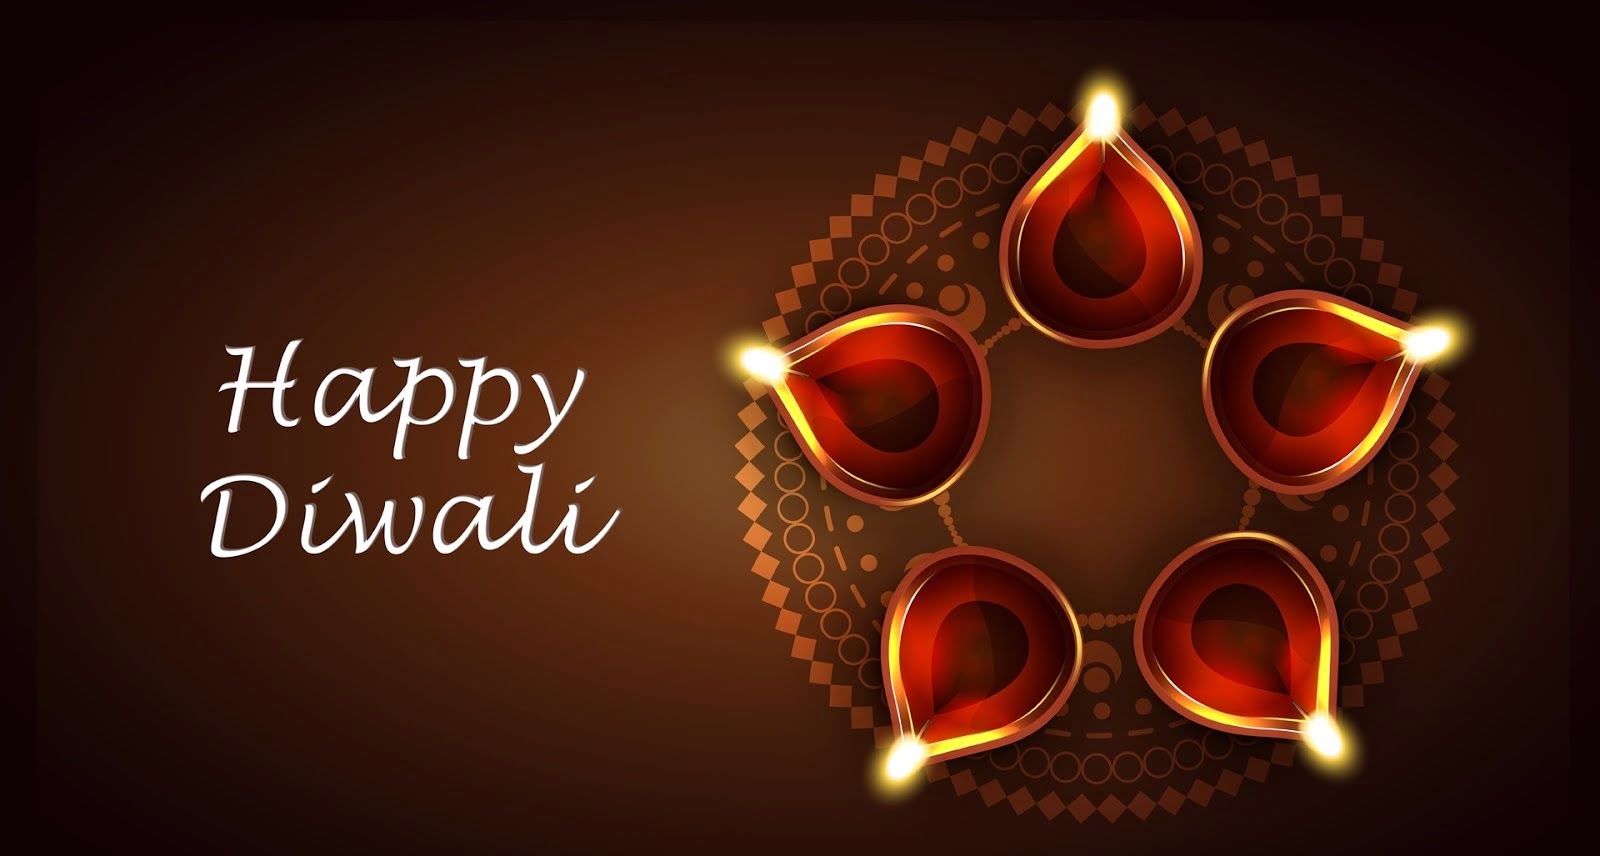 Happy Diwali Wallpaper HD Pictures One